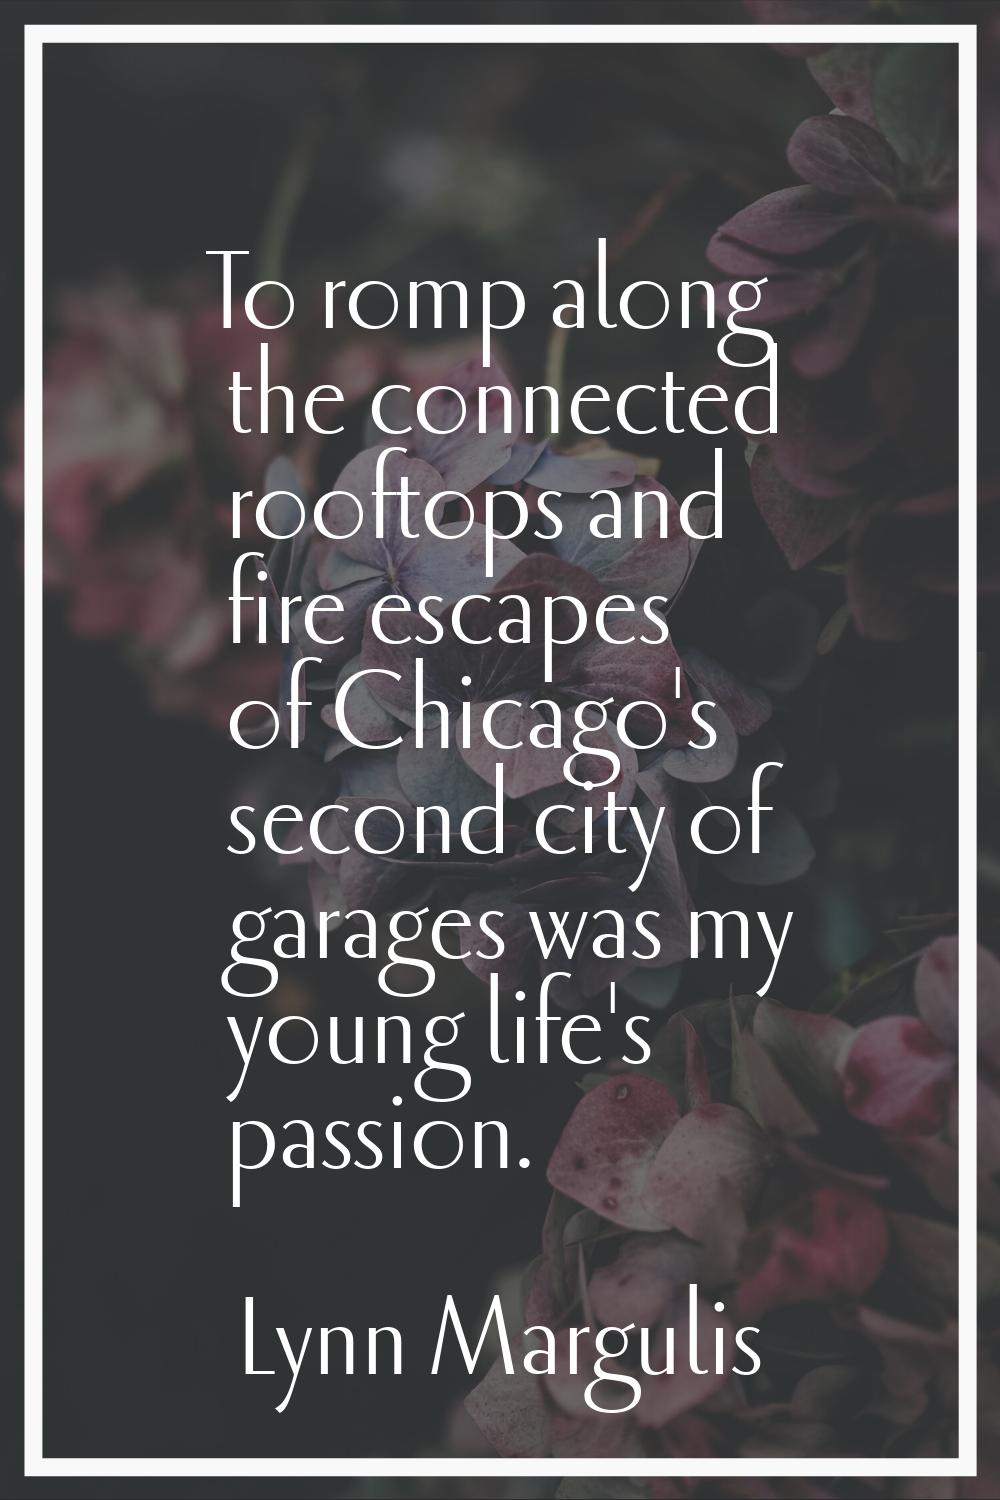 To romp along the connected rooftops and fire escapes of Chicago's second city of garages was my yo